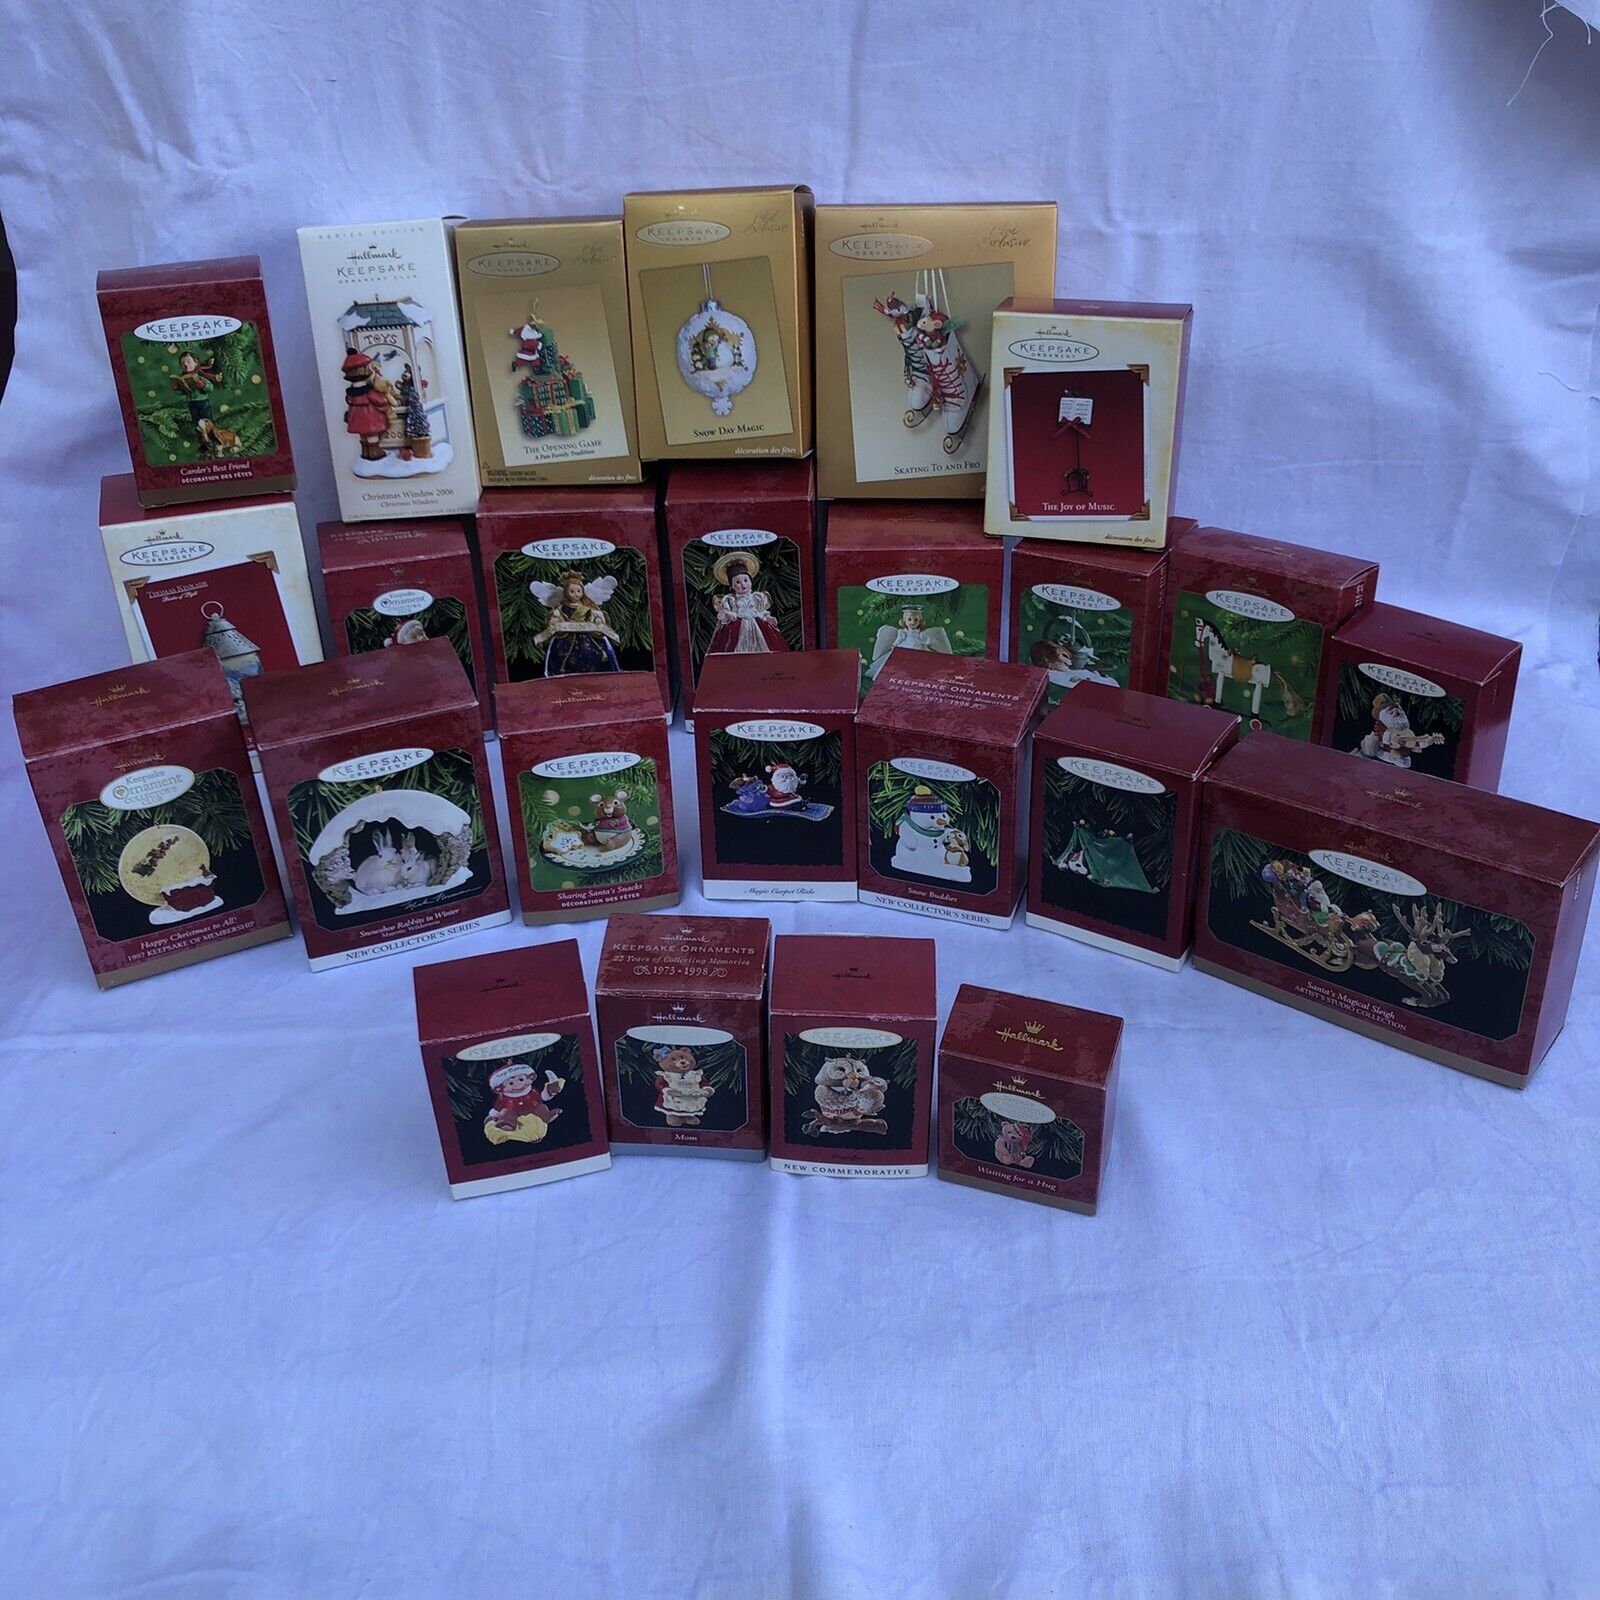 Hallmark Christmas Ornament Lot of 84 With Complete Inventory In Photos